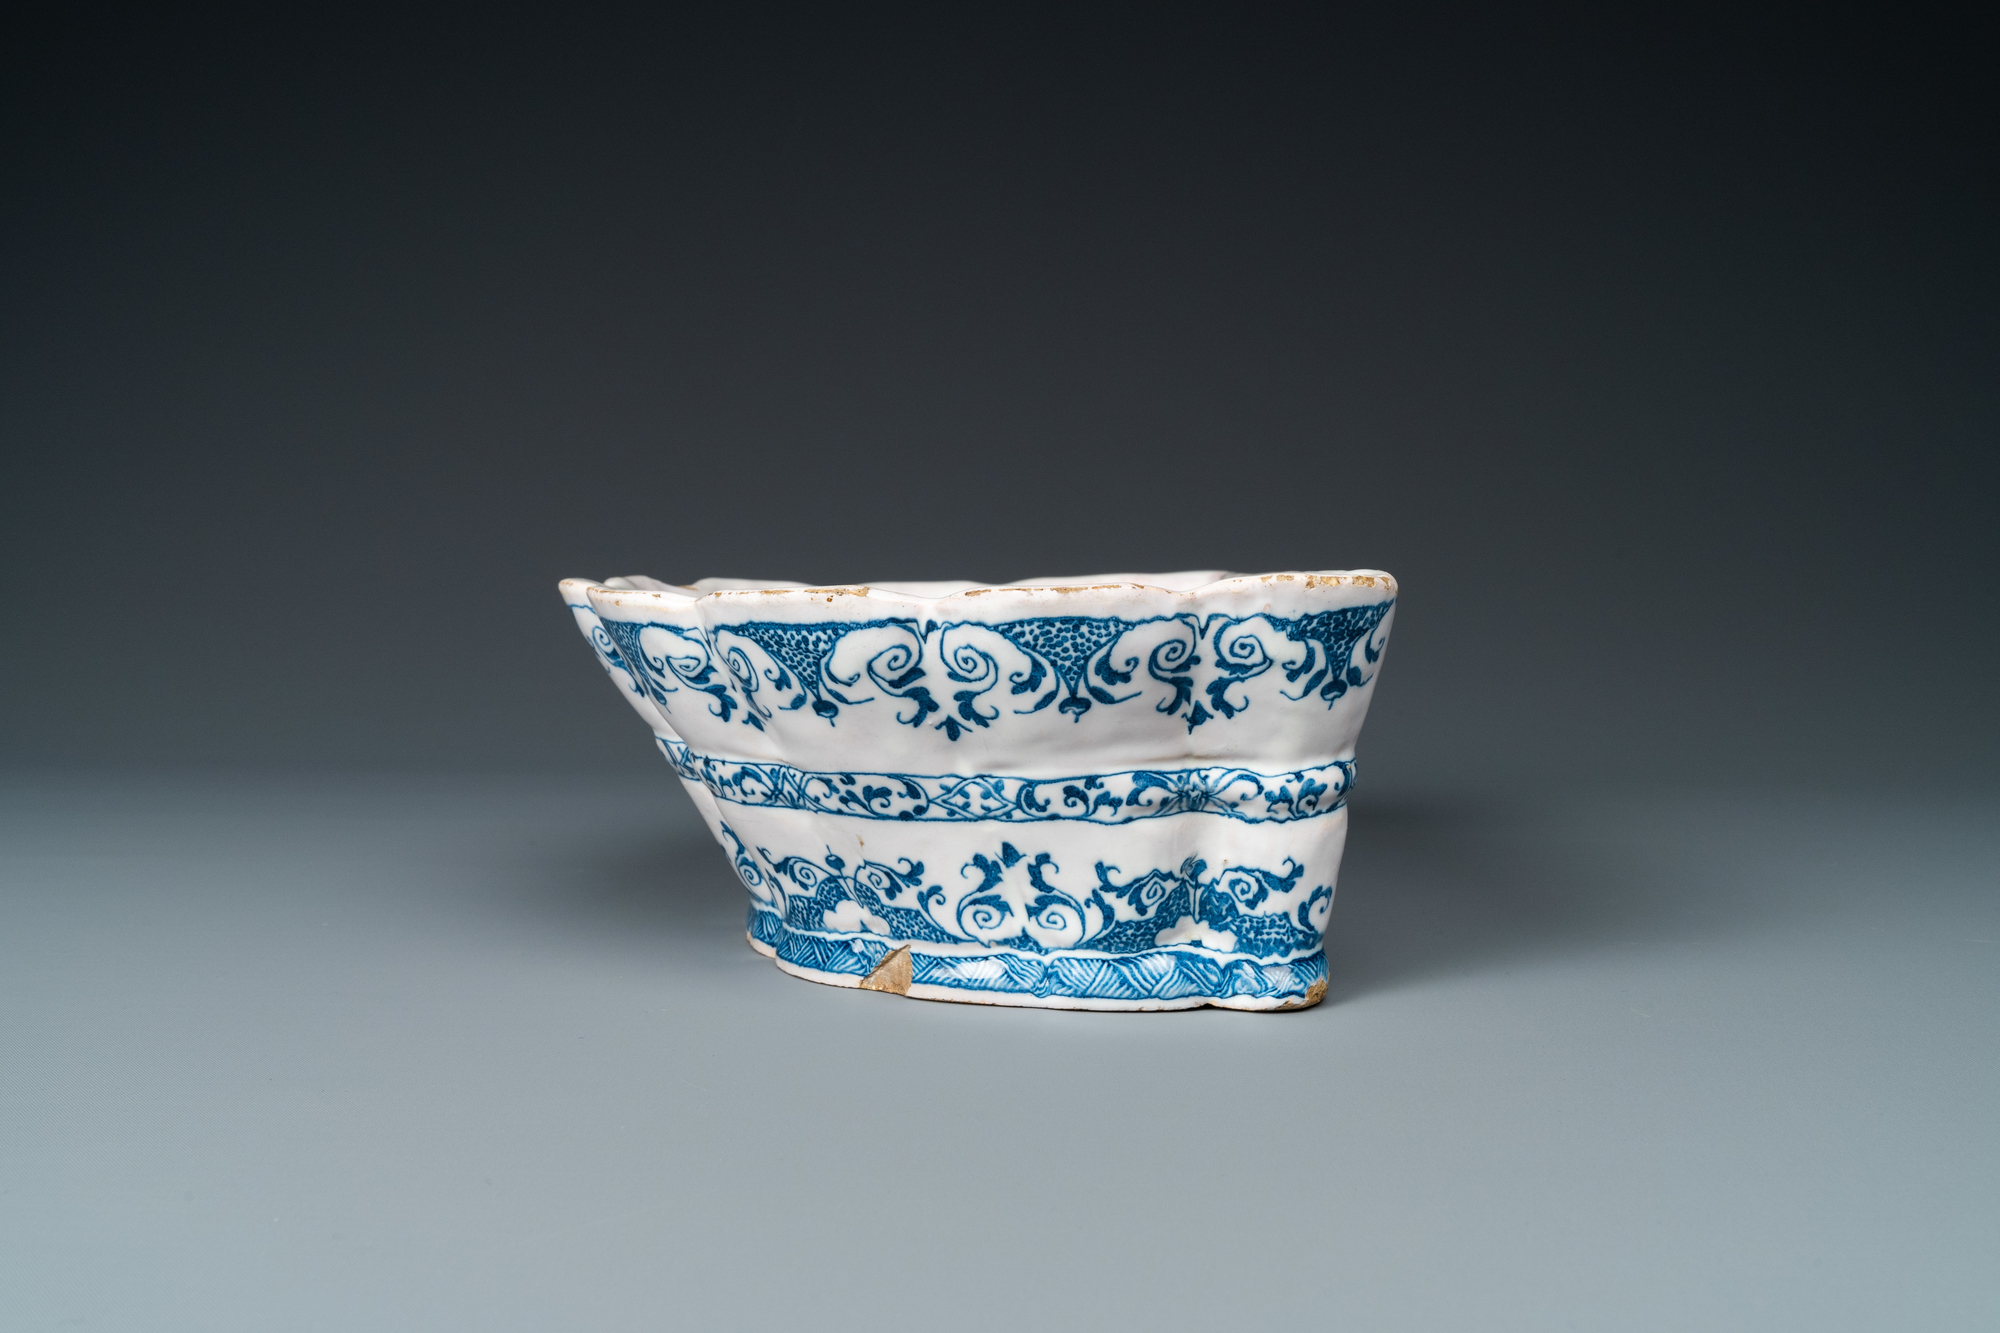 A blue and white Moustiers faience flower holder, France, 18th C. - Image 4 of 8